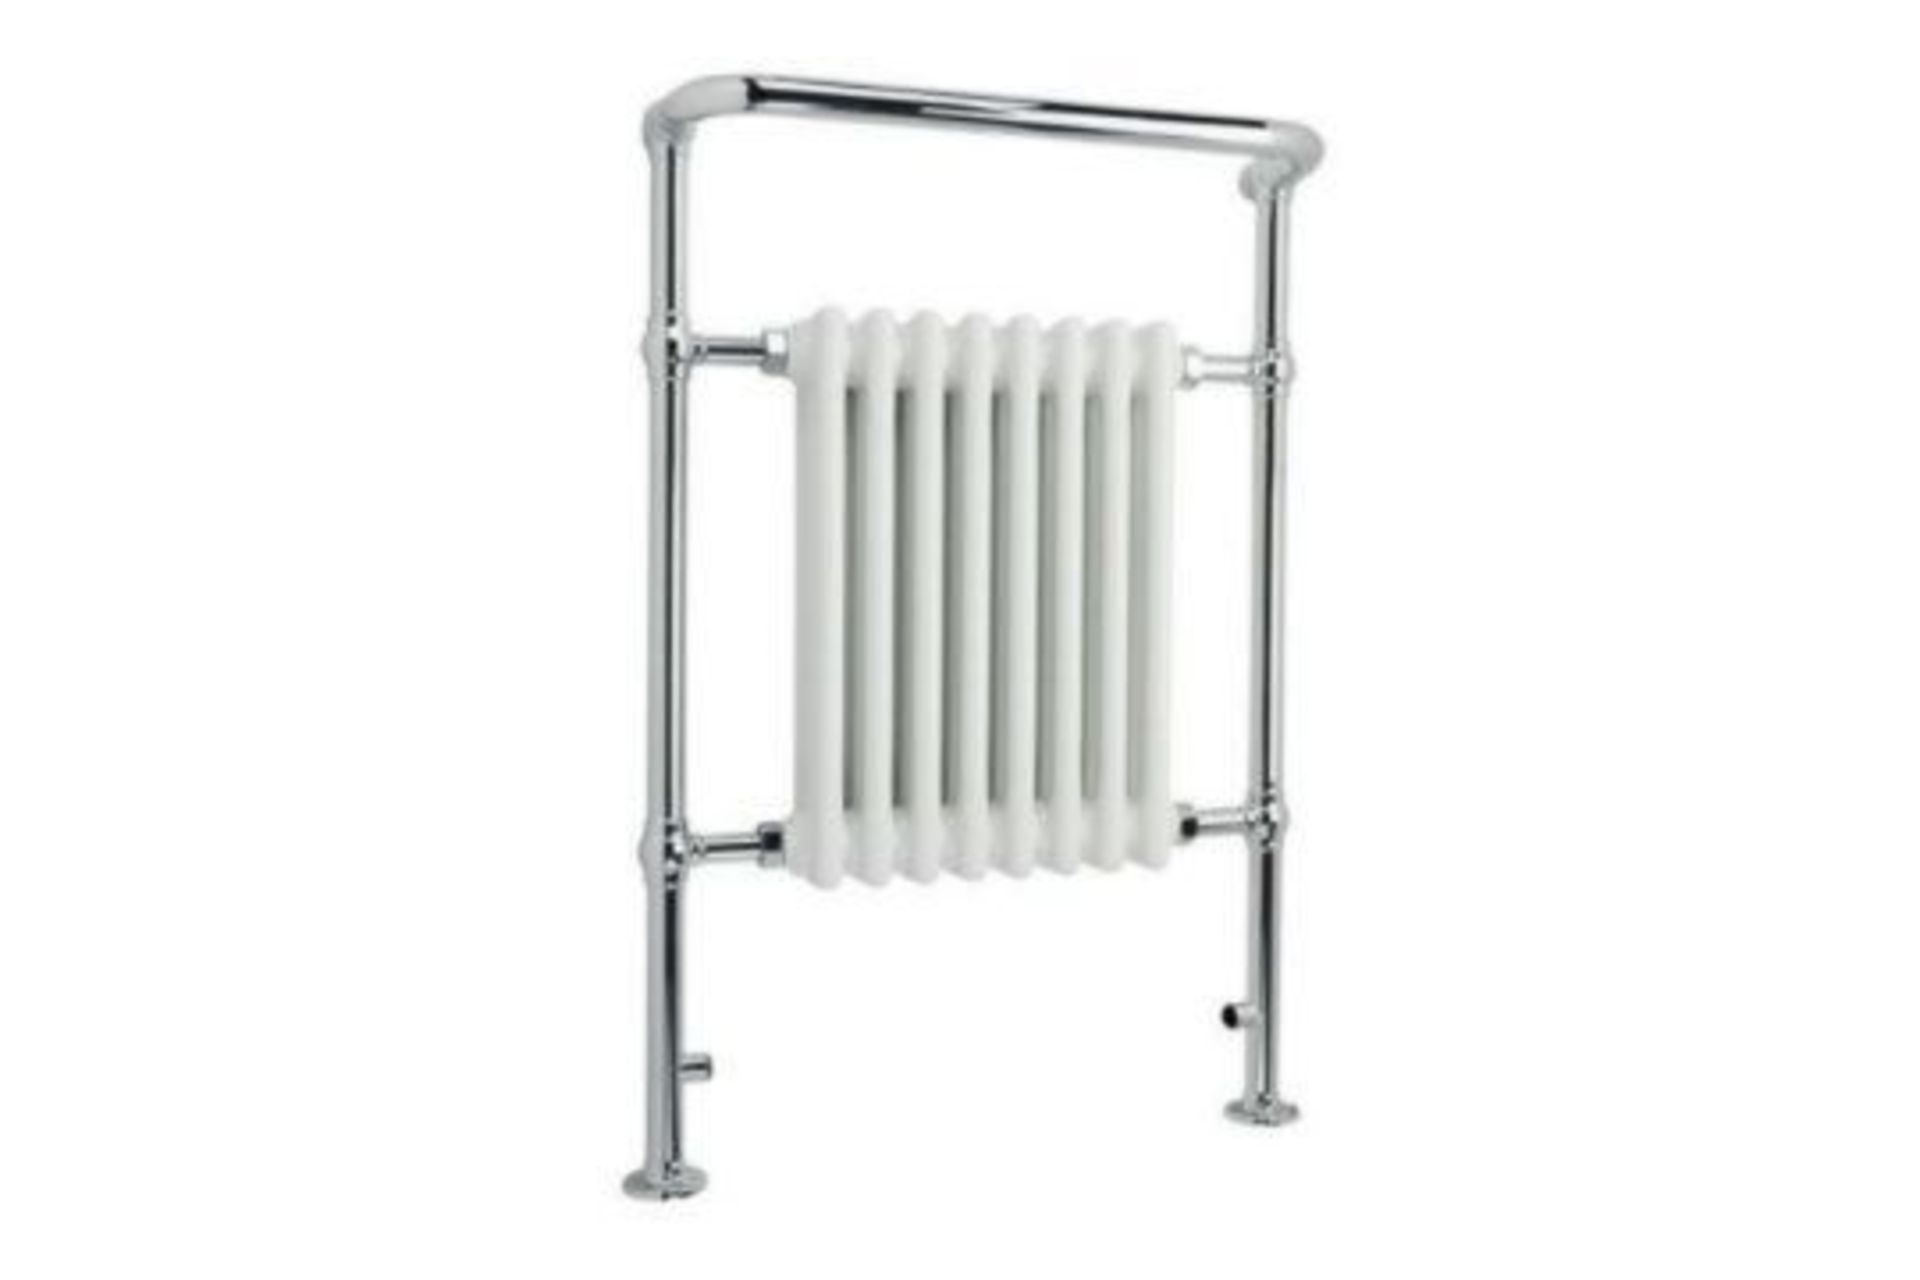 NEW & BOXED 952x659mm Large Traditional White Premium Towel Rail Radiator.RRP £499.99.We love ... - Image 2 of 2